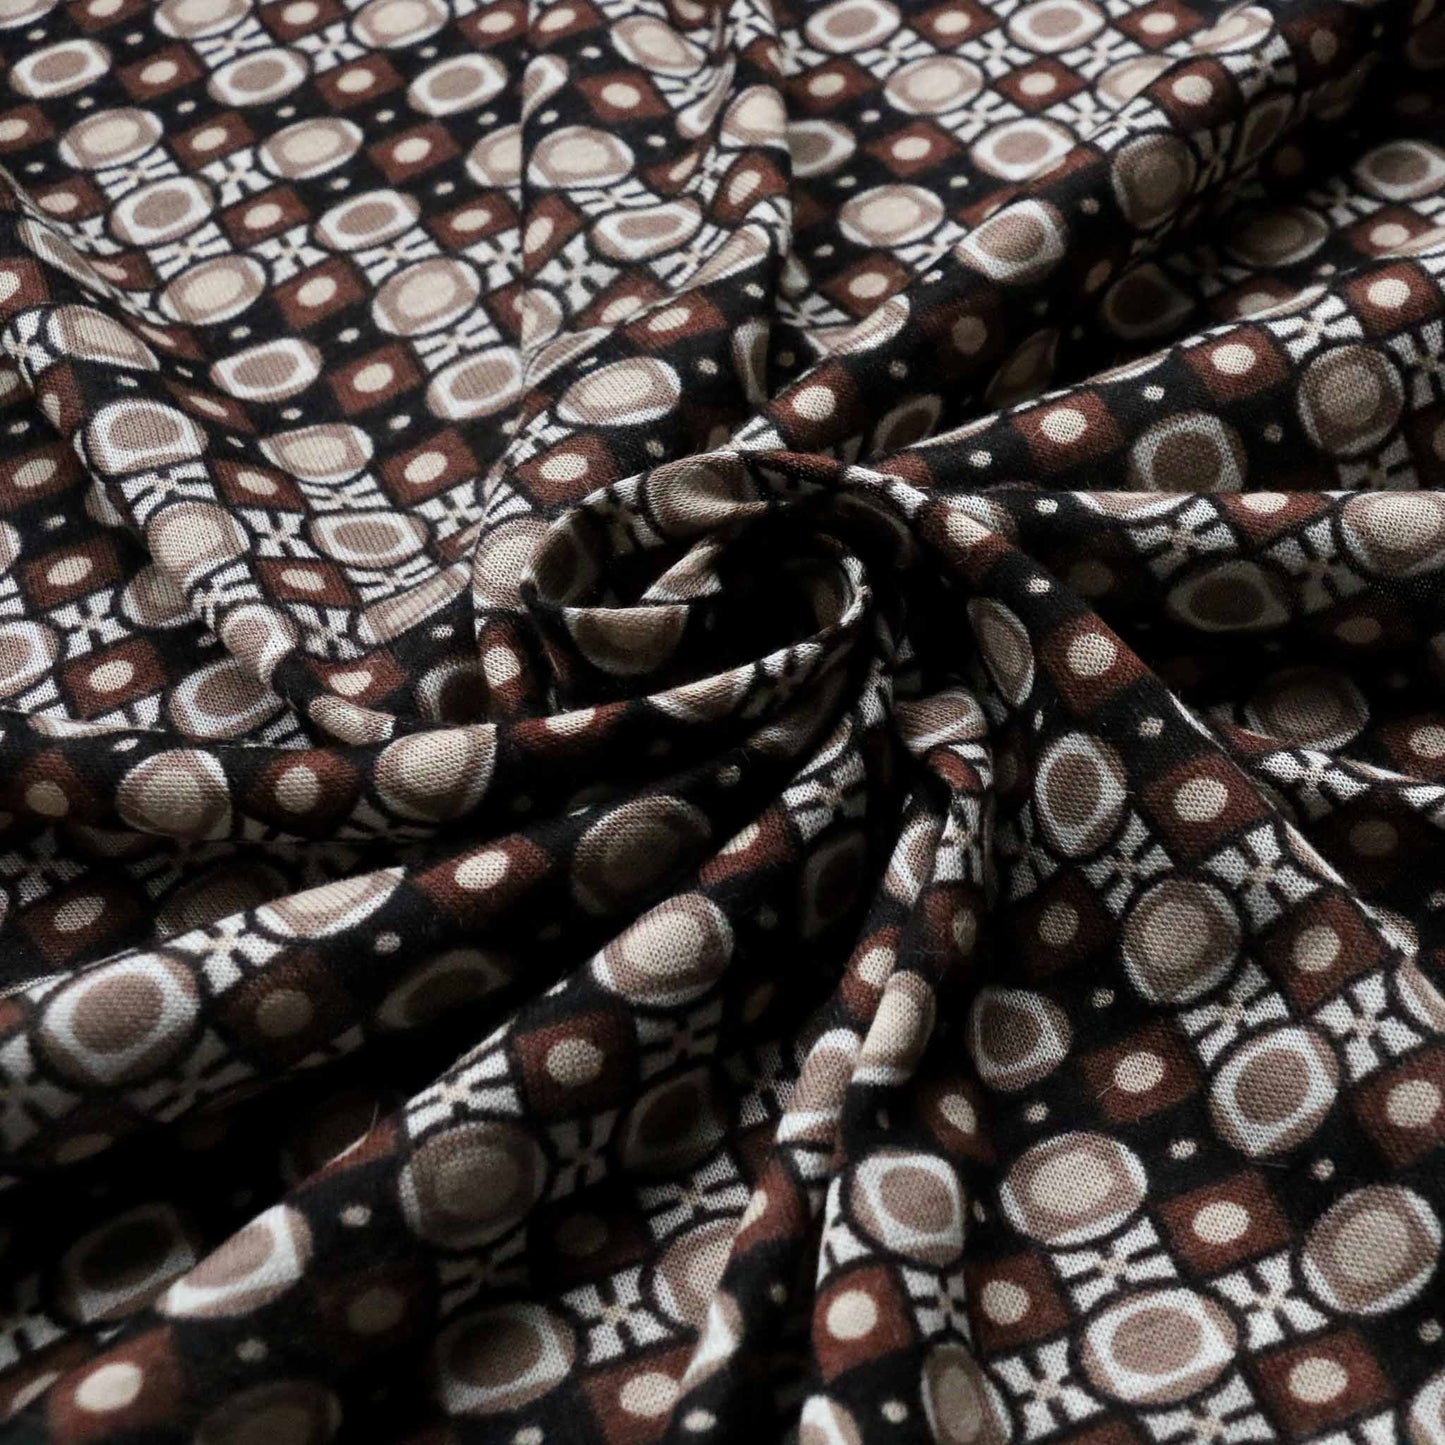 sustainable deadstock retro printed jersey knit vintage dressmaking fabric with black and brown printed pattern